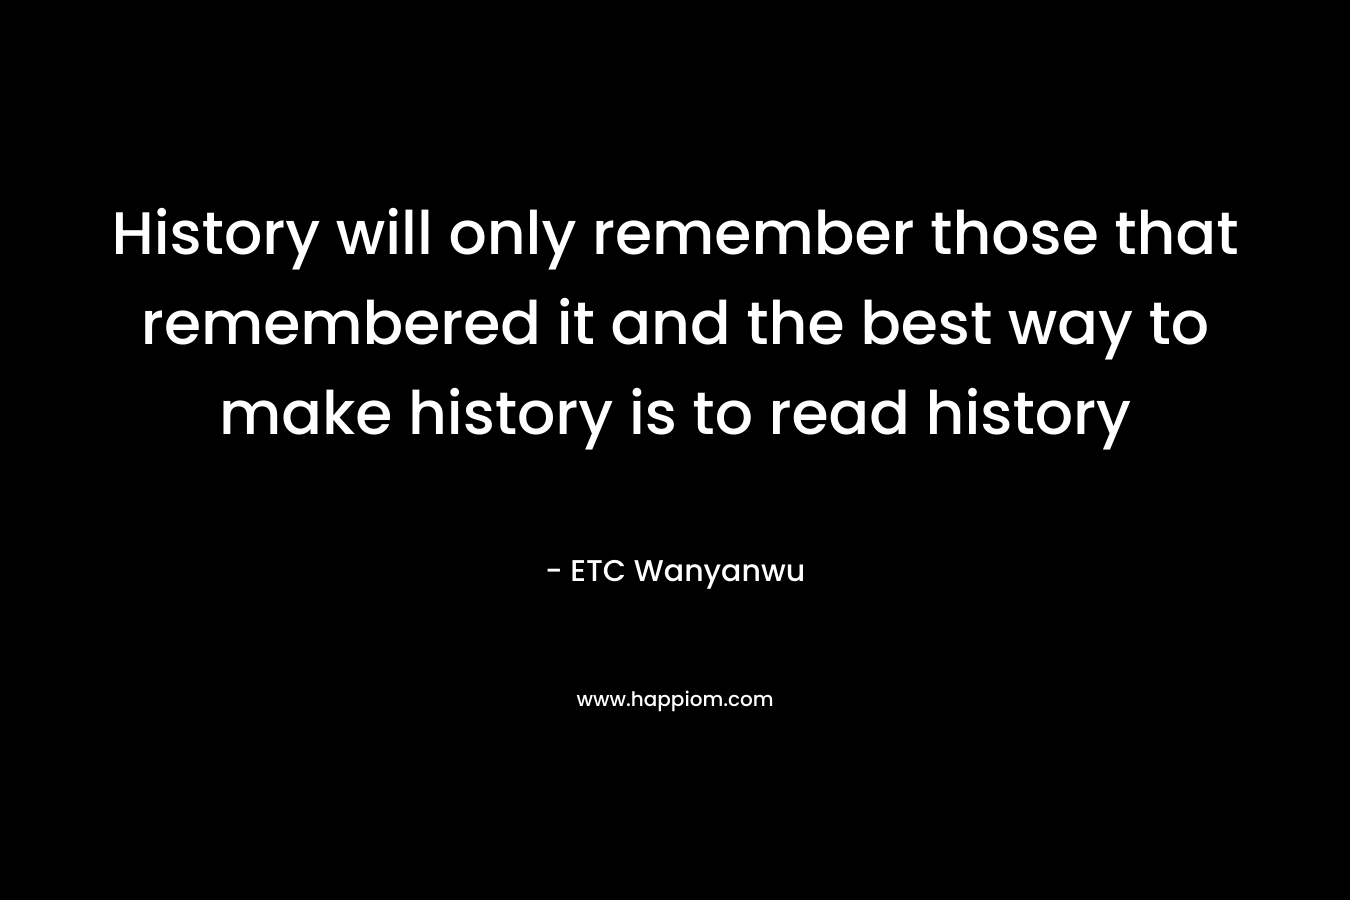 History will only remember those that remembered it and the best way to make history is to read history